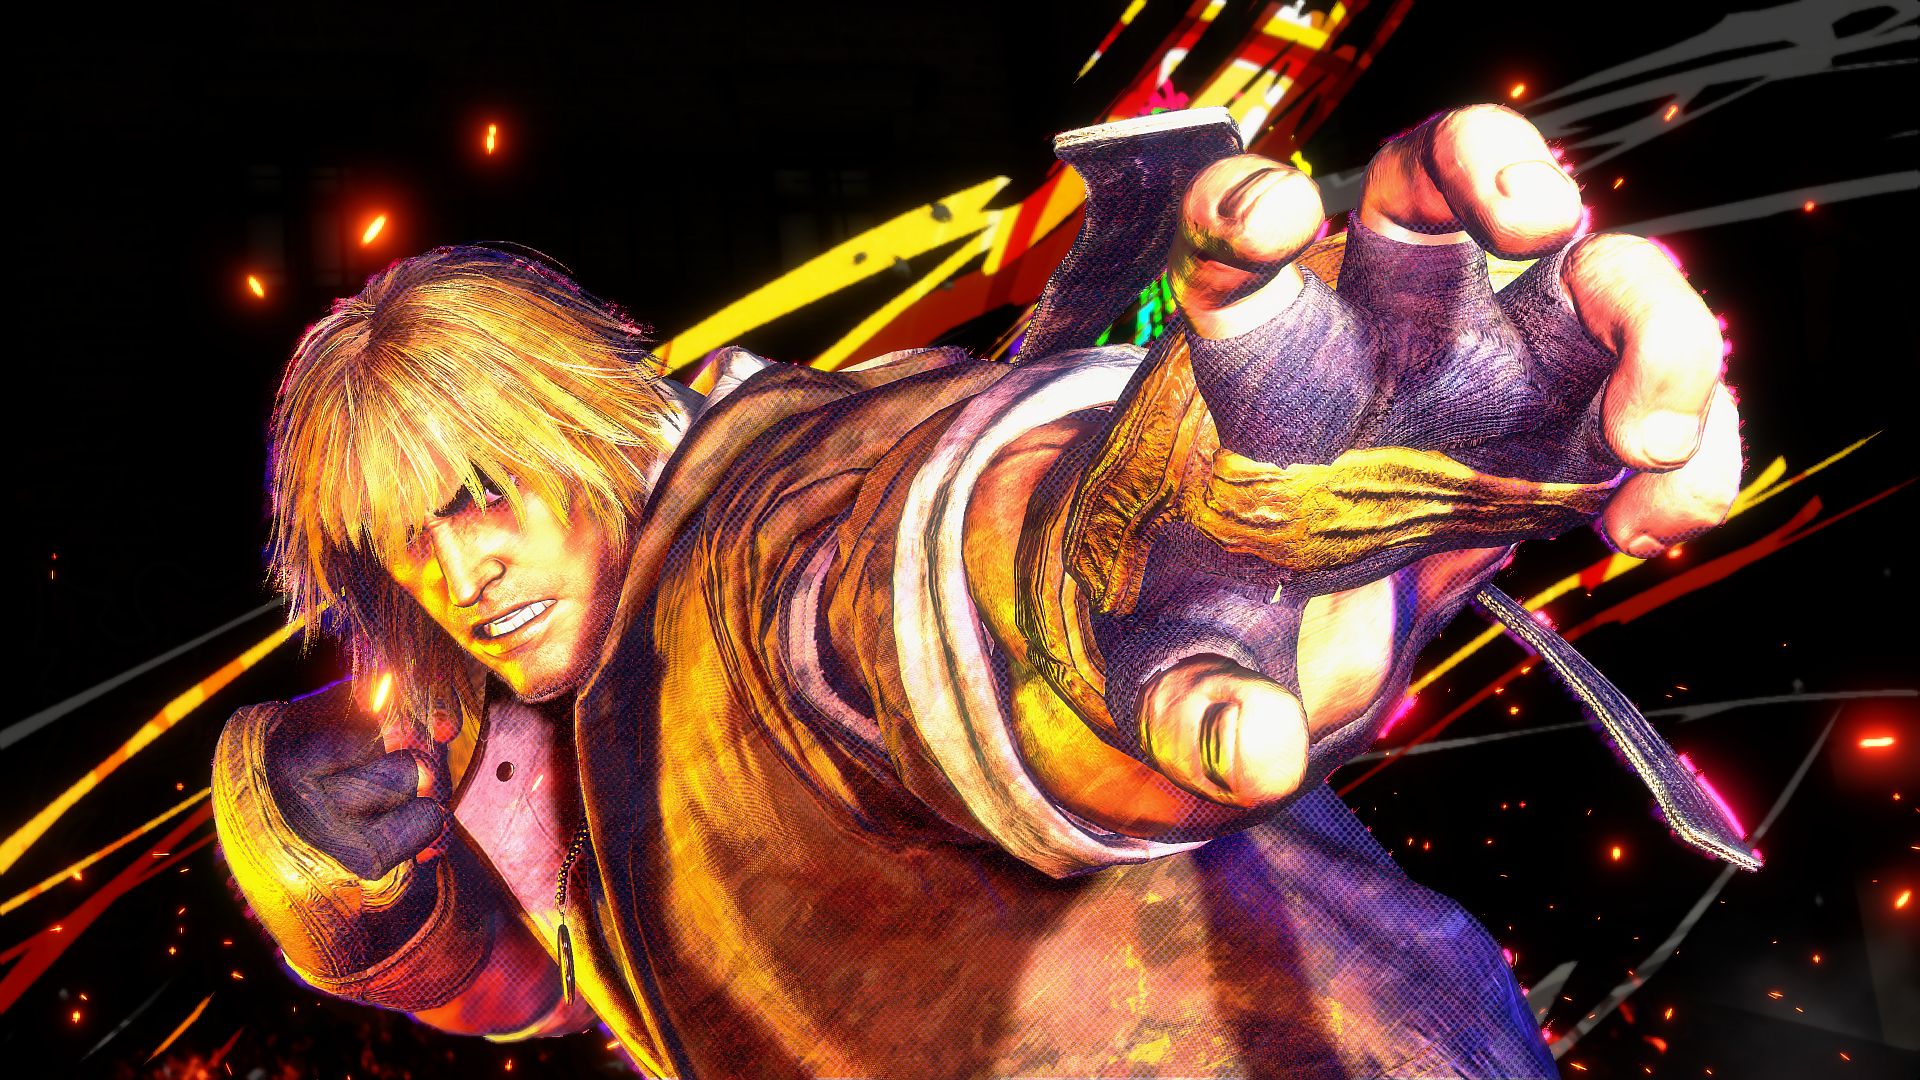 Street Fighter 6 Ken does a martial arts pose with one palm outstretched towards the camera, wearing black fingerless gloves and a brown coat, with a shock of blond hair over his eyes.